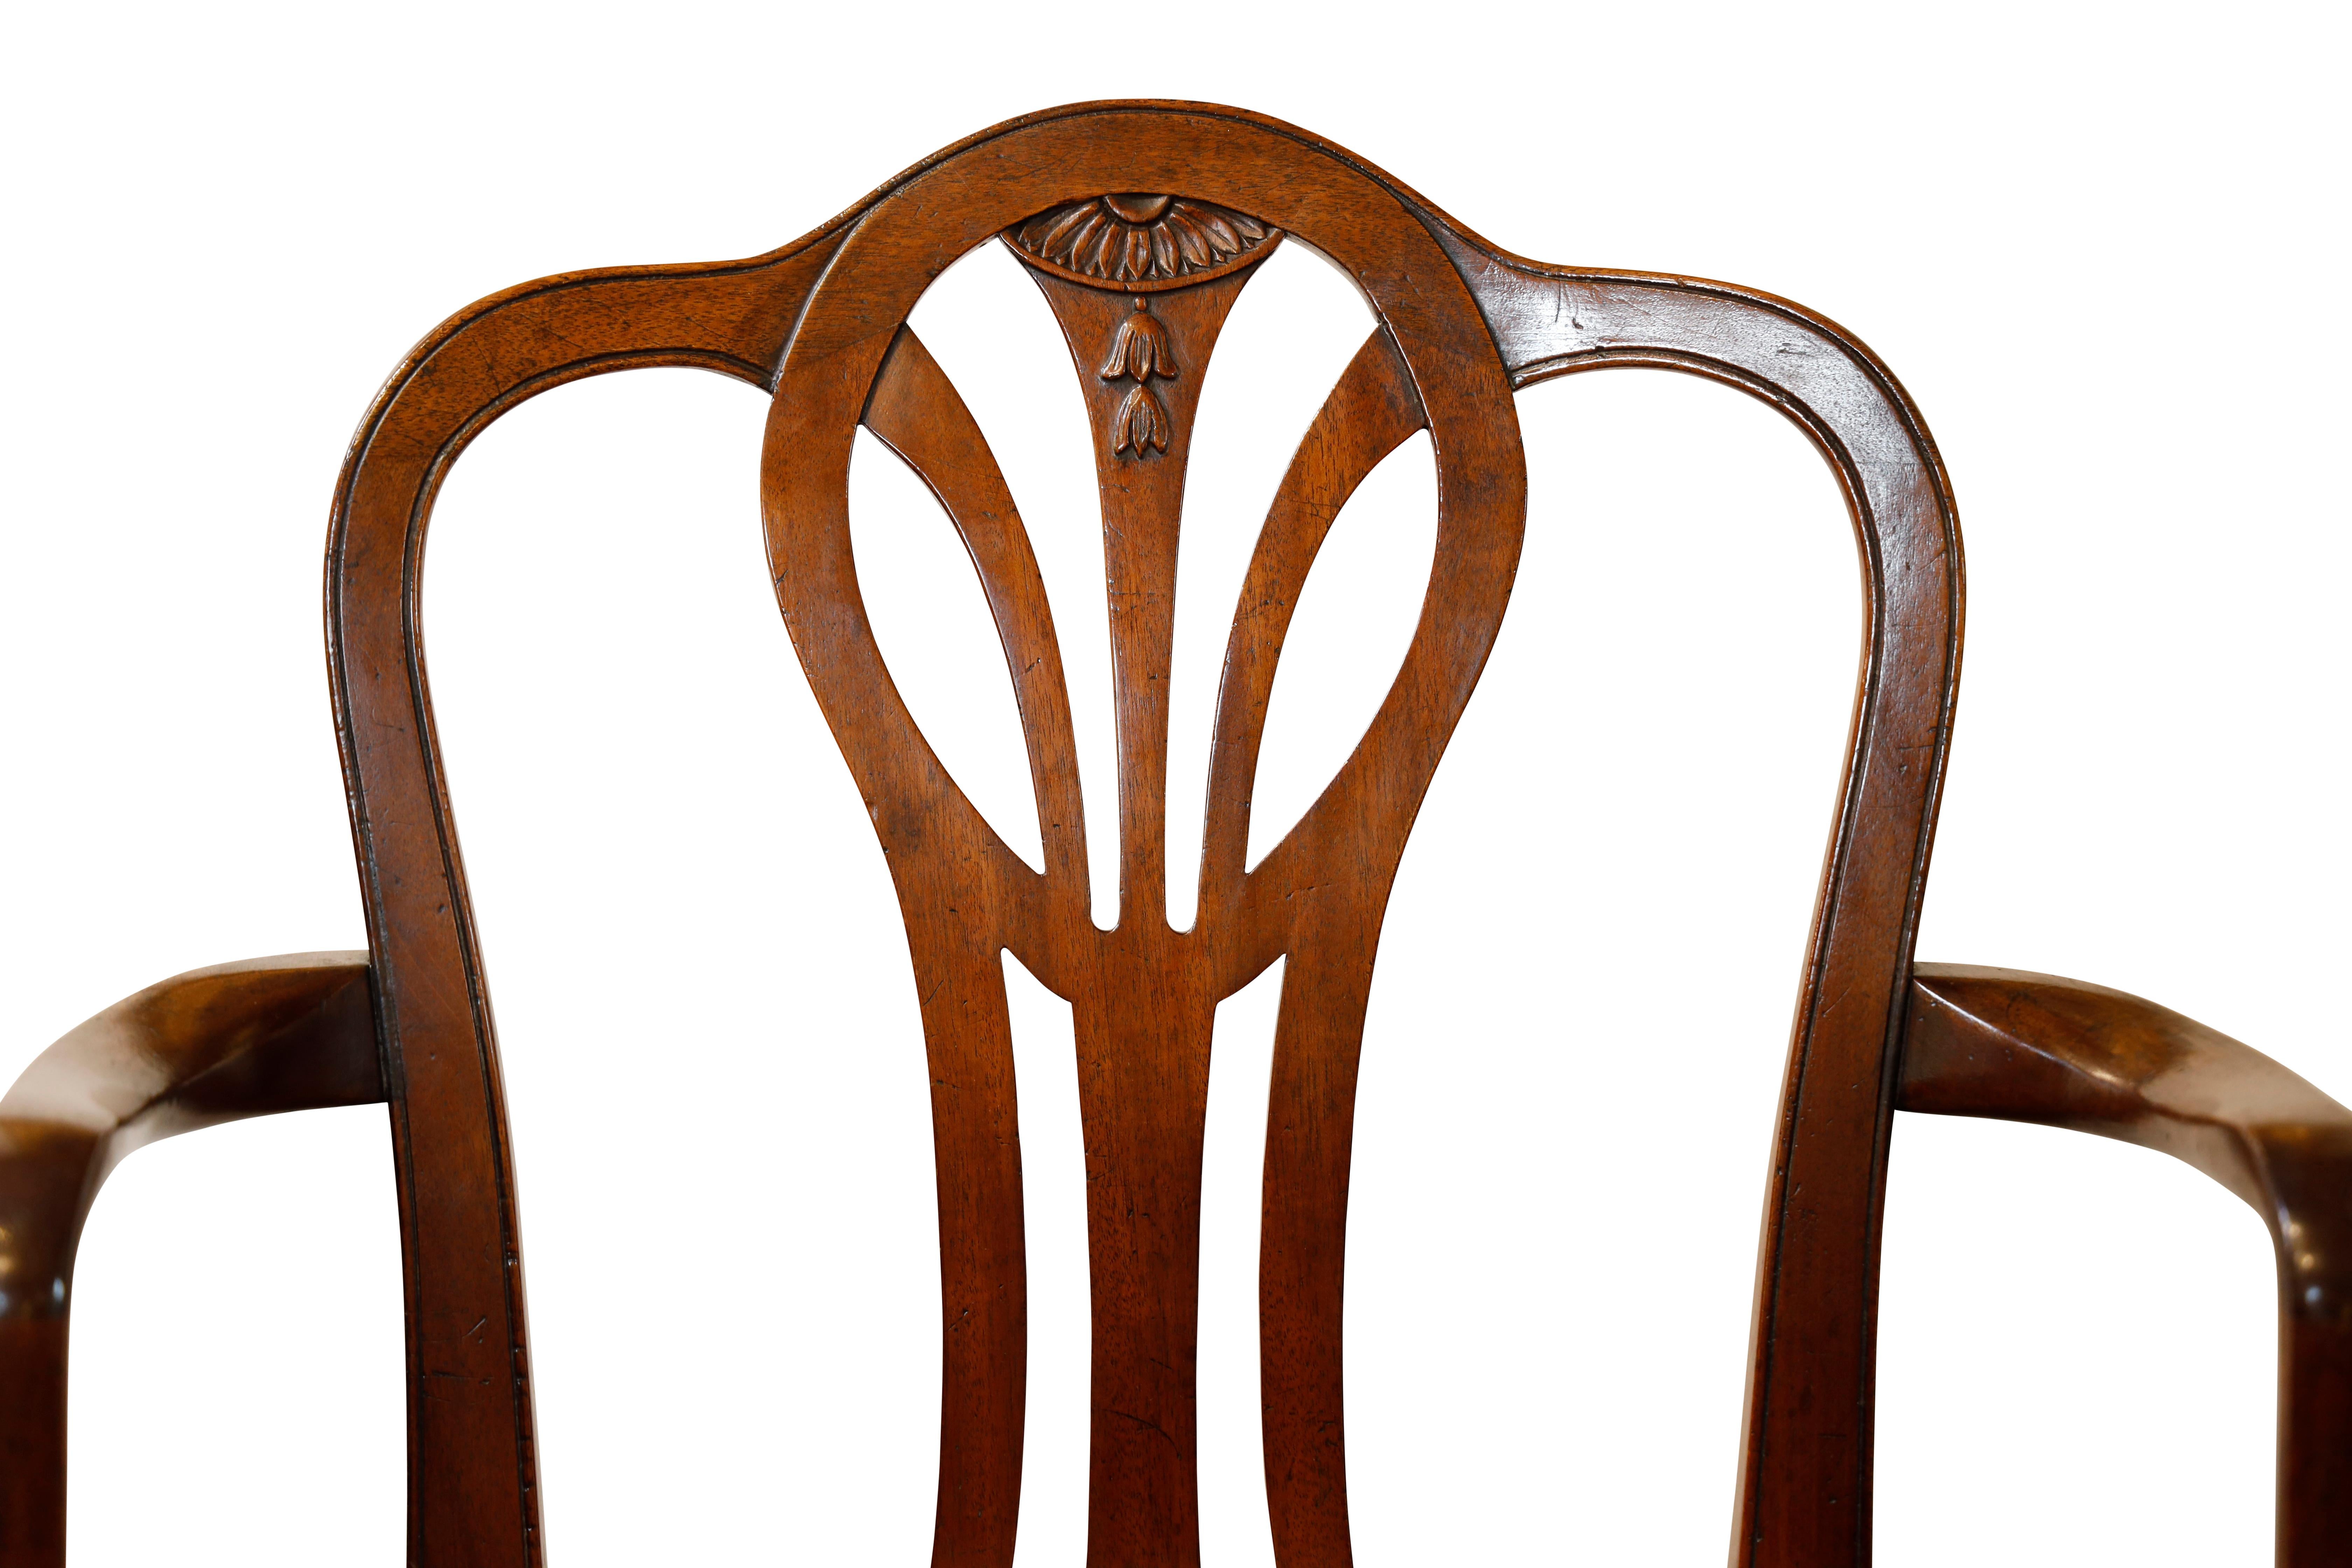 Set of 12 Georgian Style Dining Chairs, 10 sides/ 2 arms.  Shaped backs with central splats and upholstered seats.  Splat features florette carving and bell flowers.  Square, tapered legs joined by 